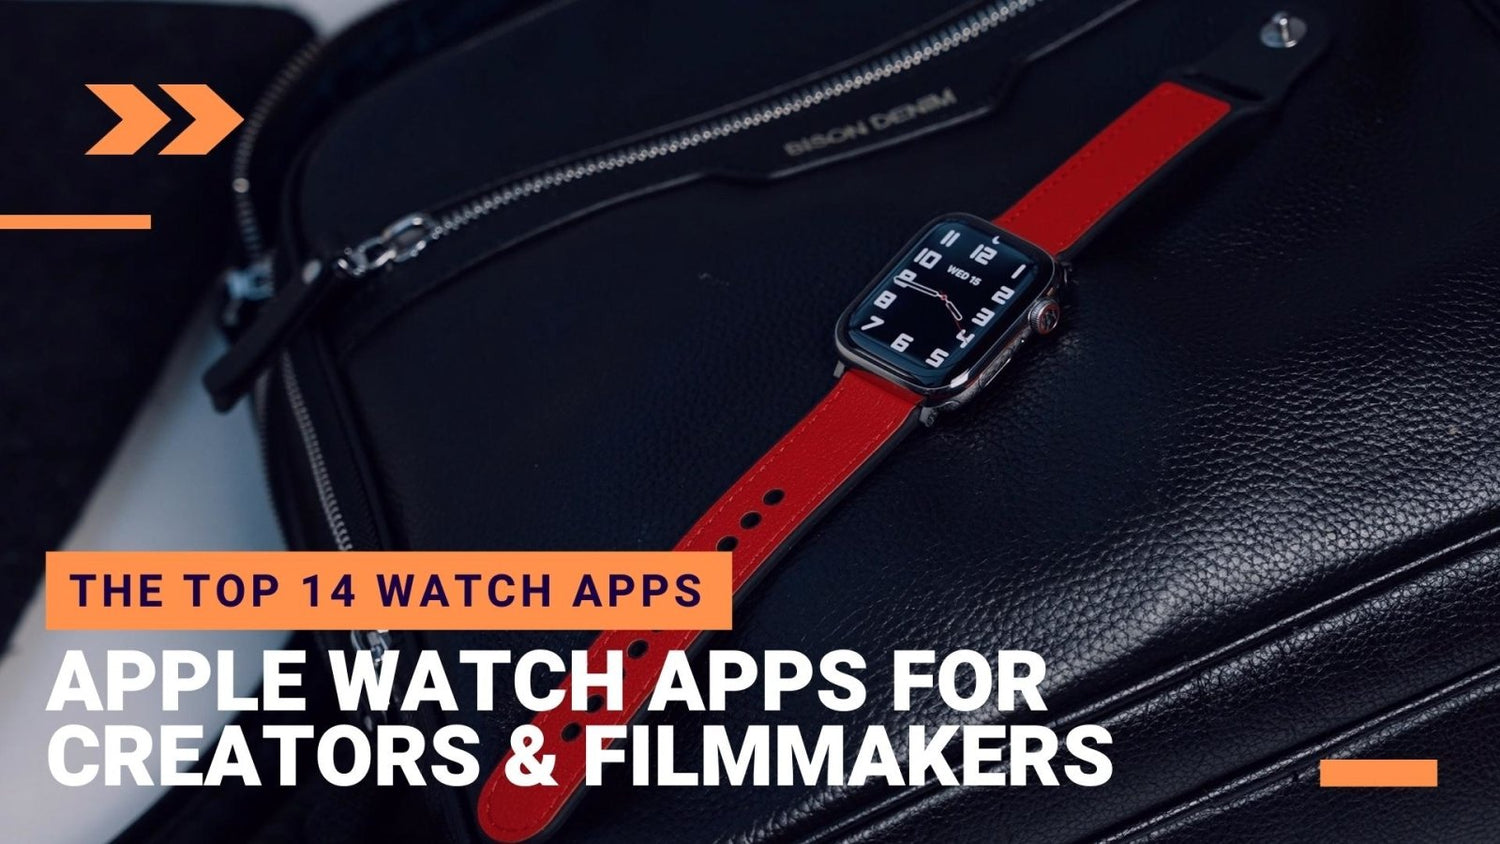 The Best Apple Watch Apps for Film makers and Creators - Editors Keys